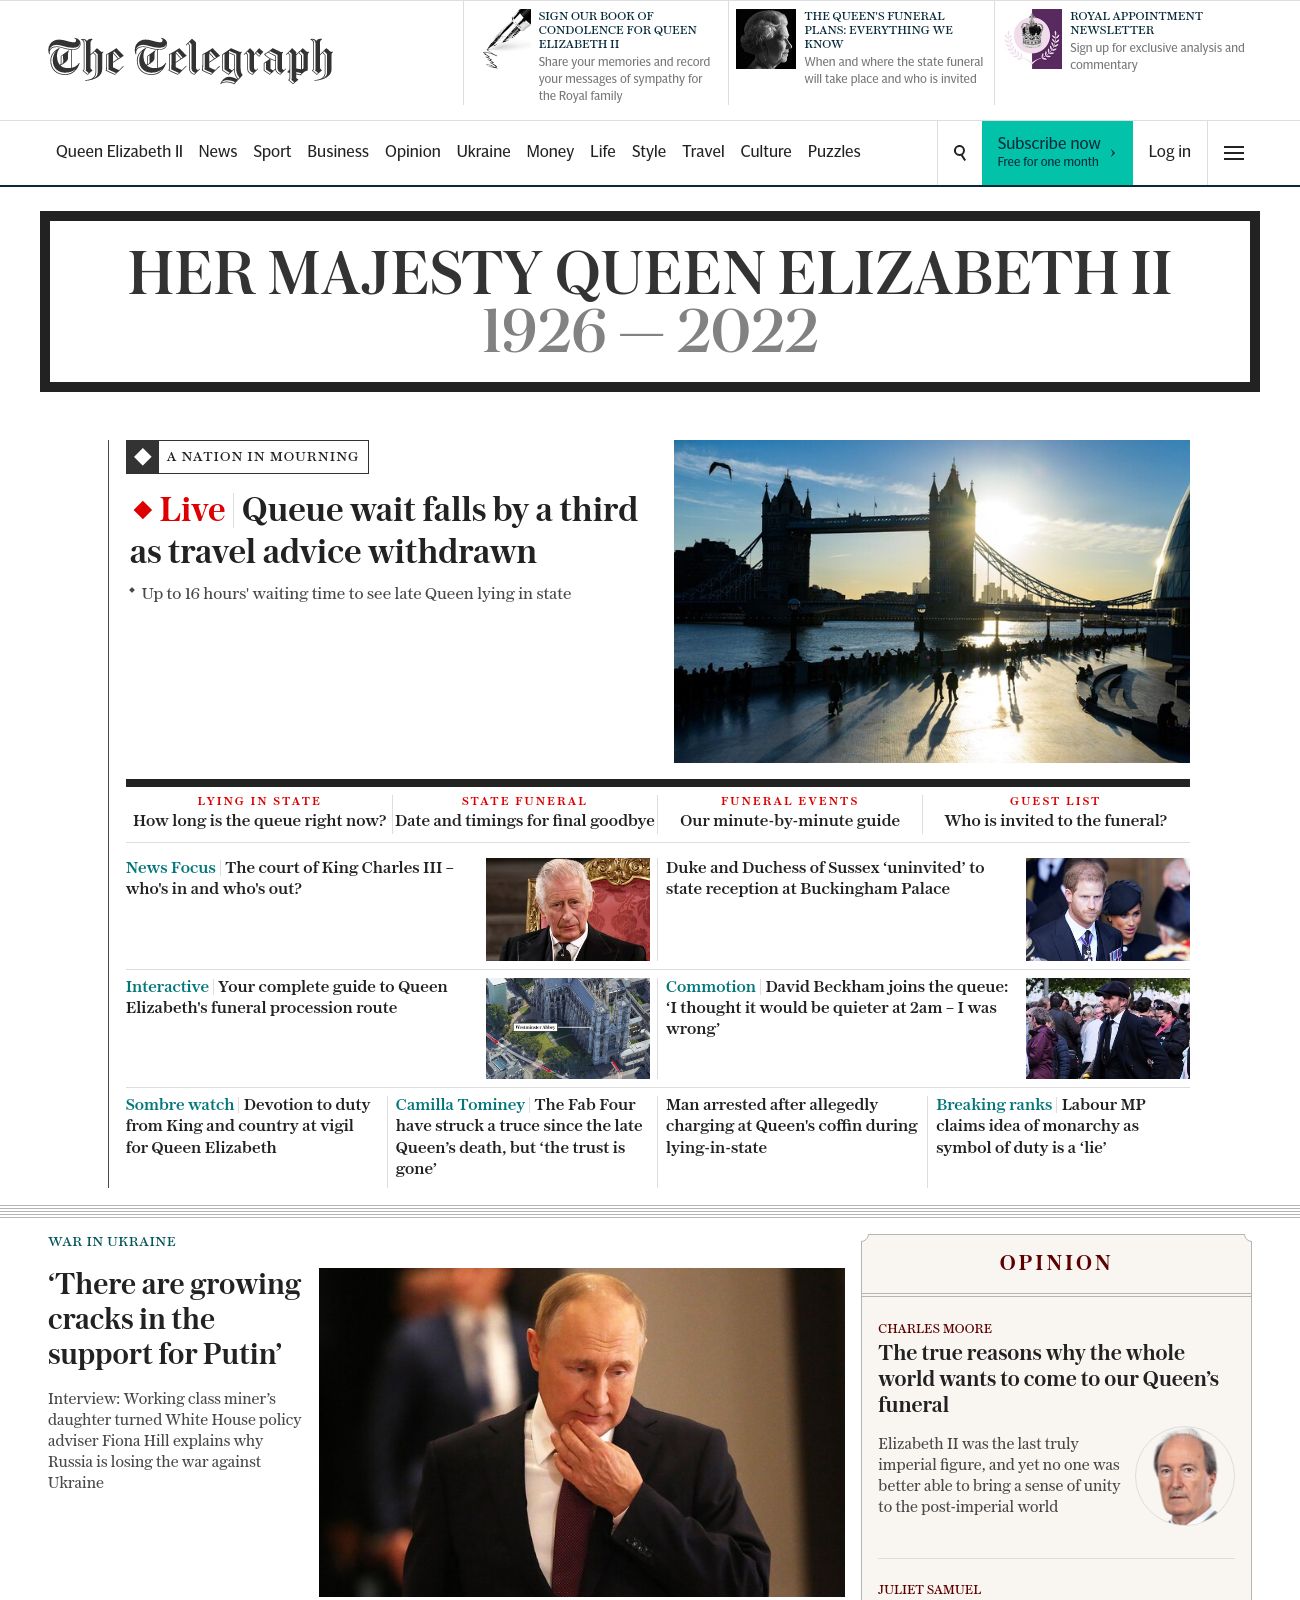 The Telegraph at 2022-09-17 10:16:36+01:00 local time